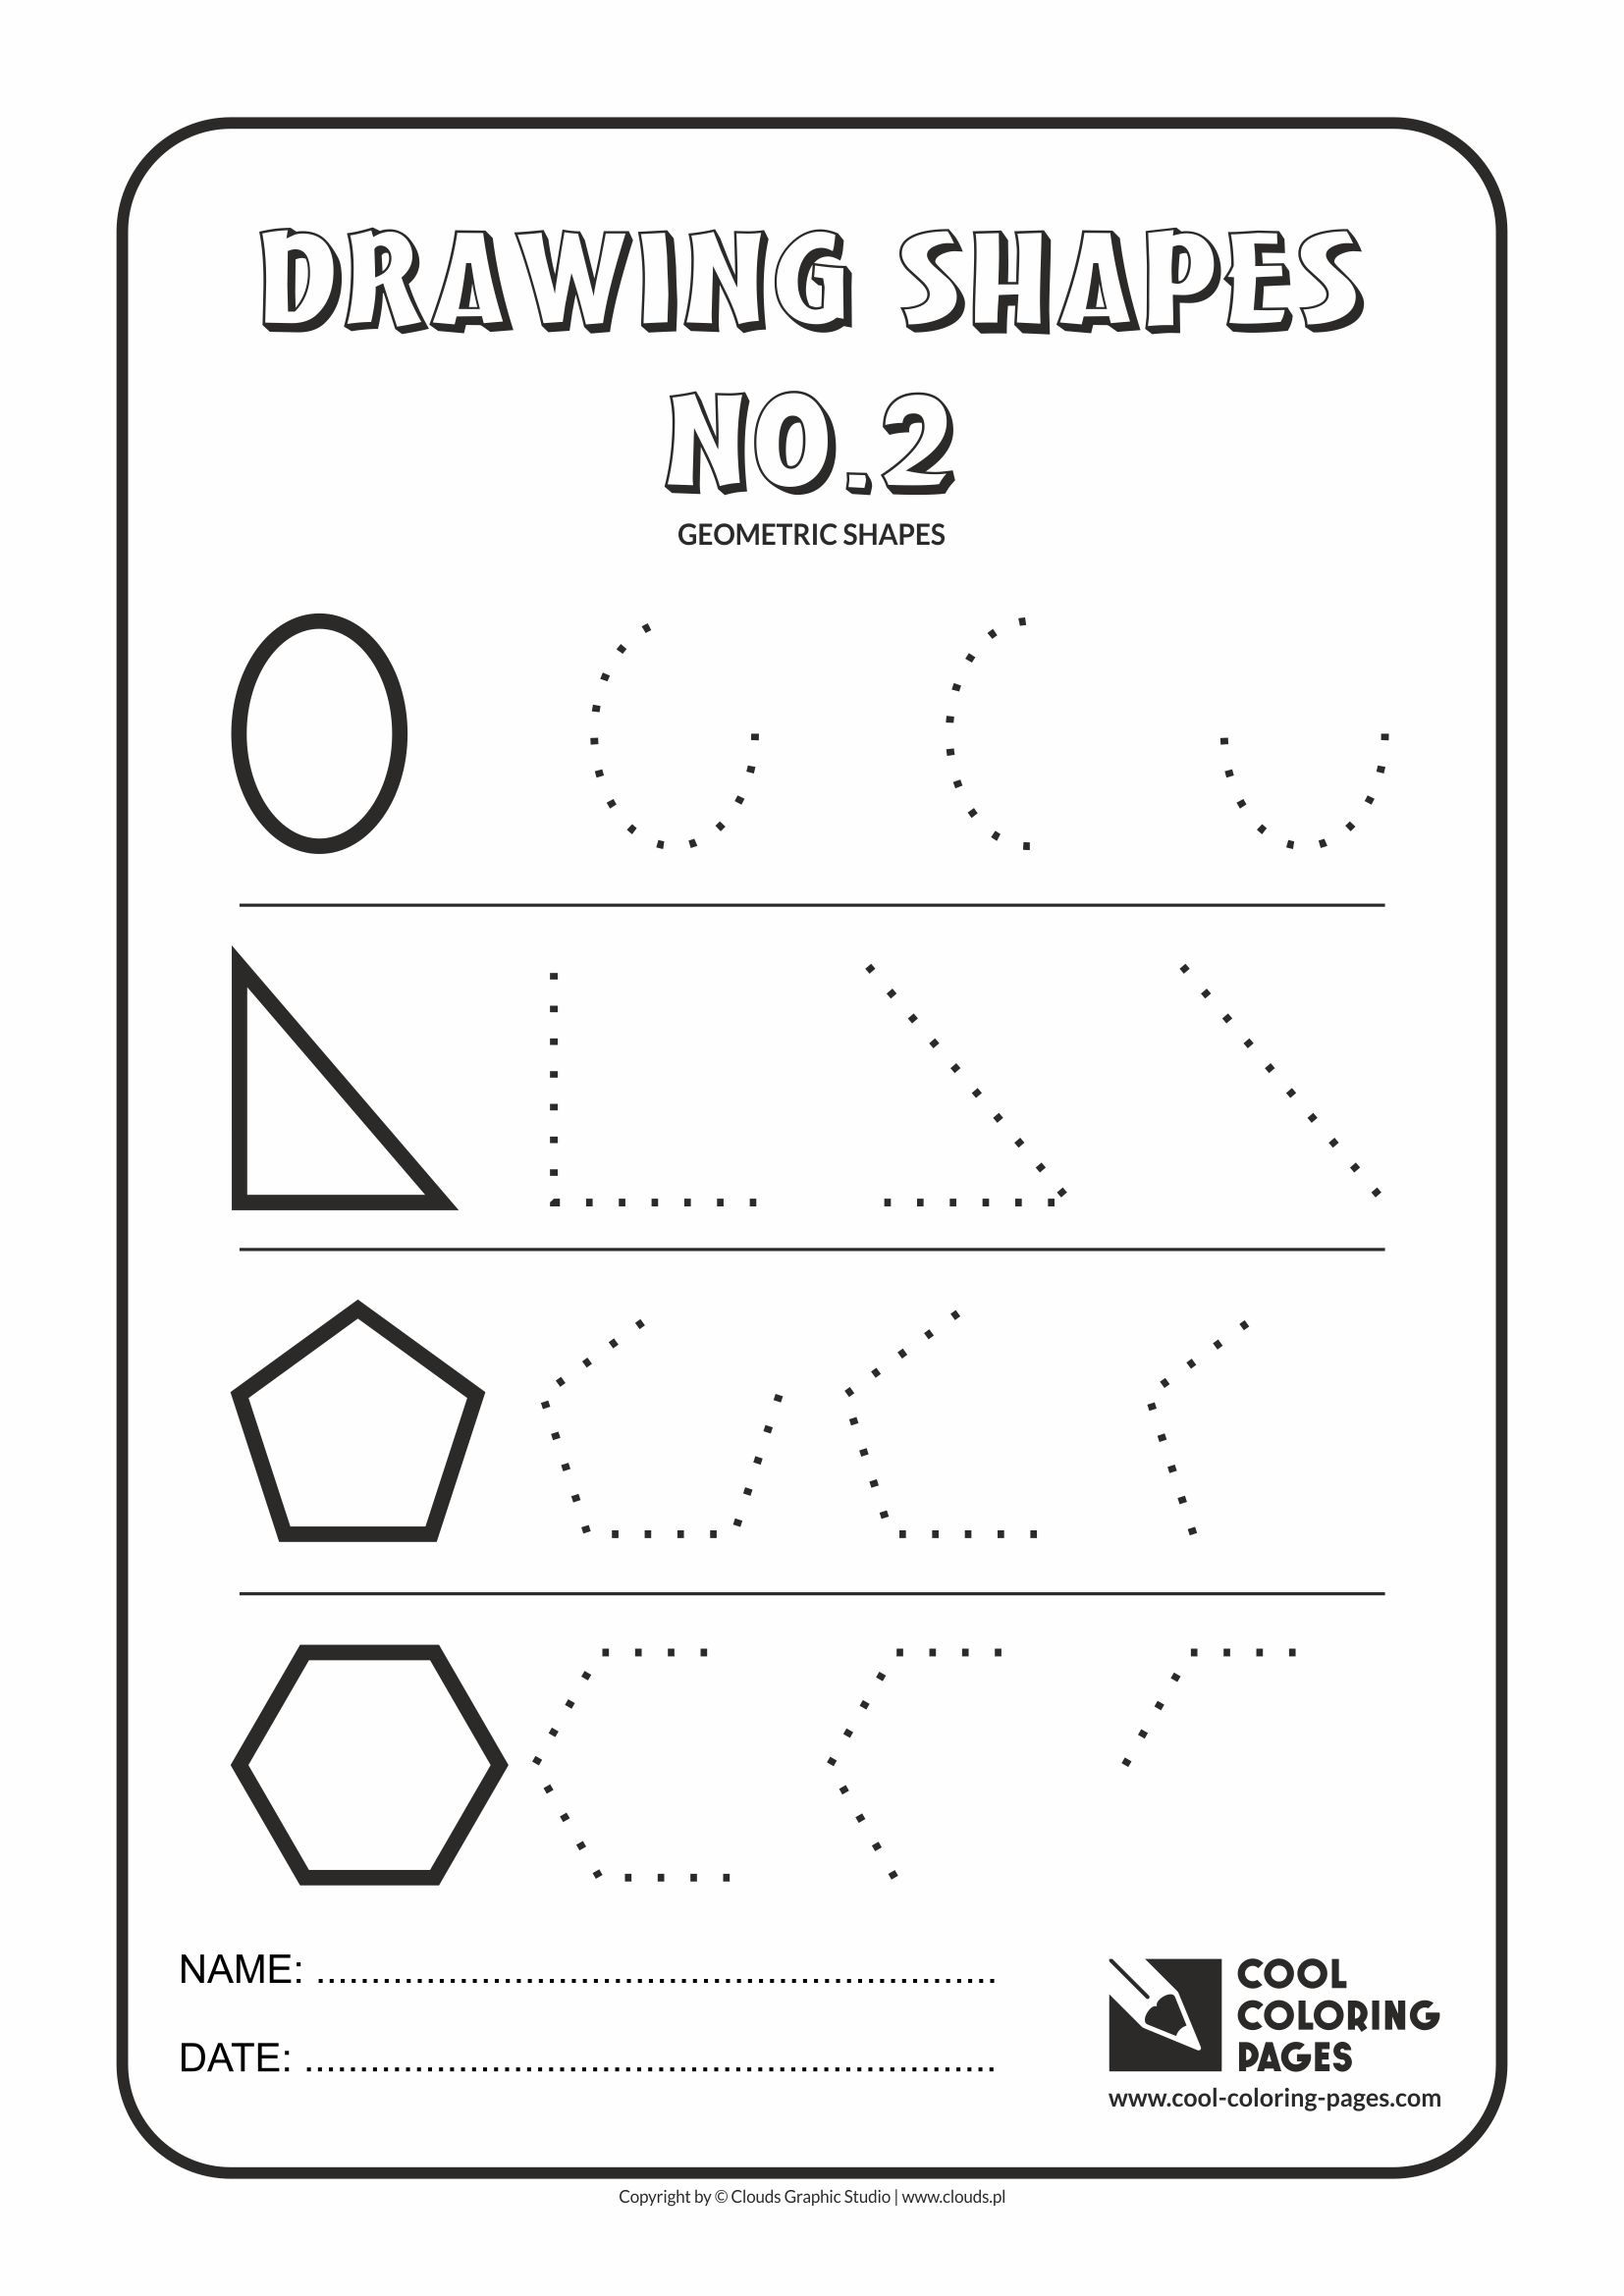 Cool Coloring Pages Geometric Shapes   Cool Coloring Pages ...